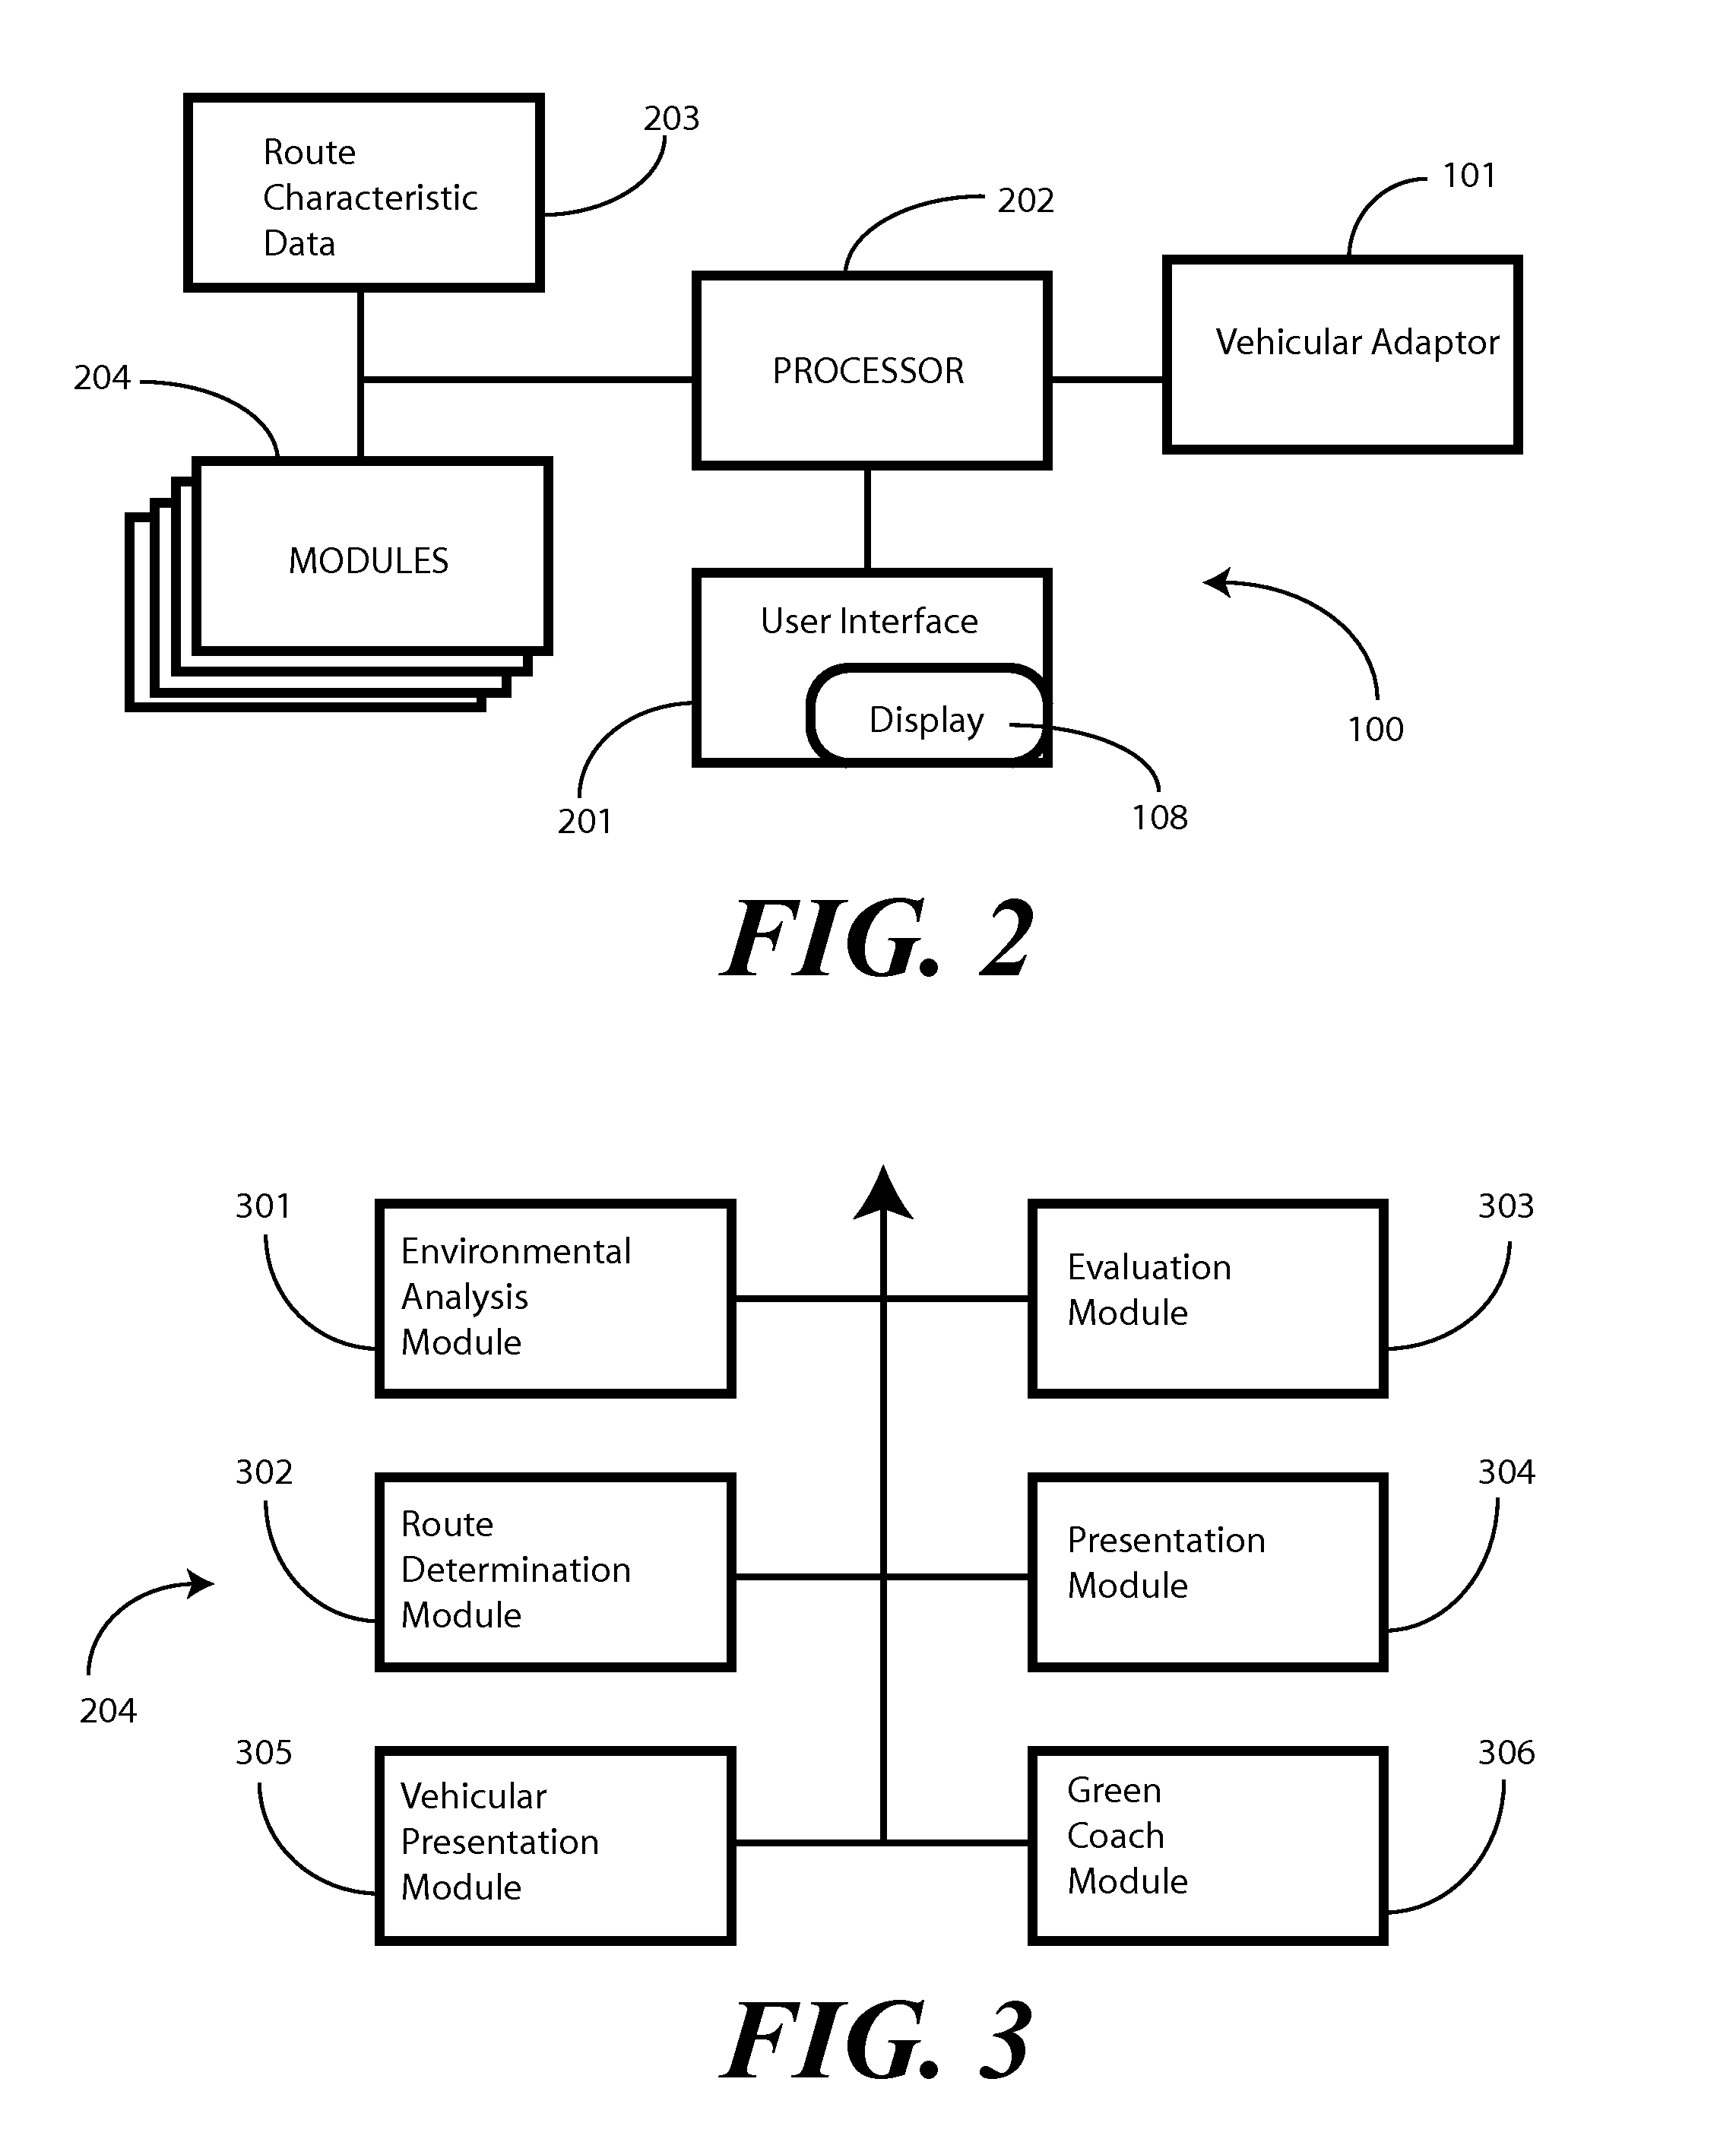 Method and System for Providing Environmentally-Optimized Navigation Routes